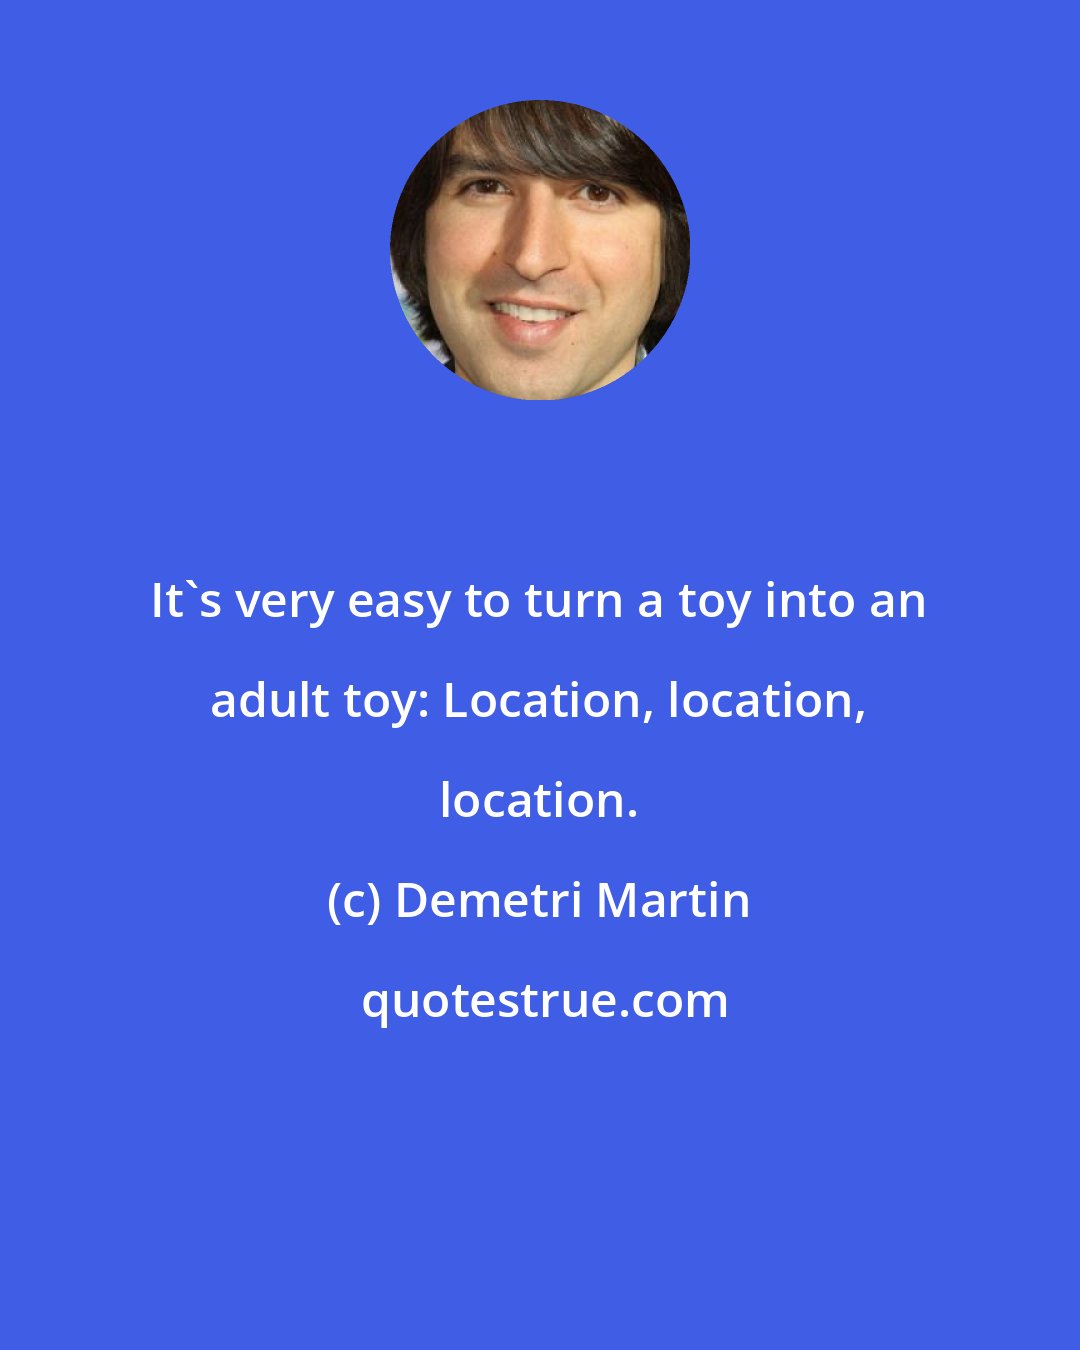 Demetri Martin: It's very easy to turn a toy into an adult toy: Location, location, location.